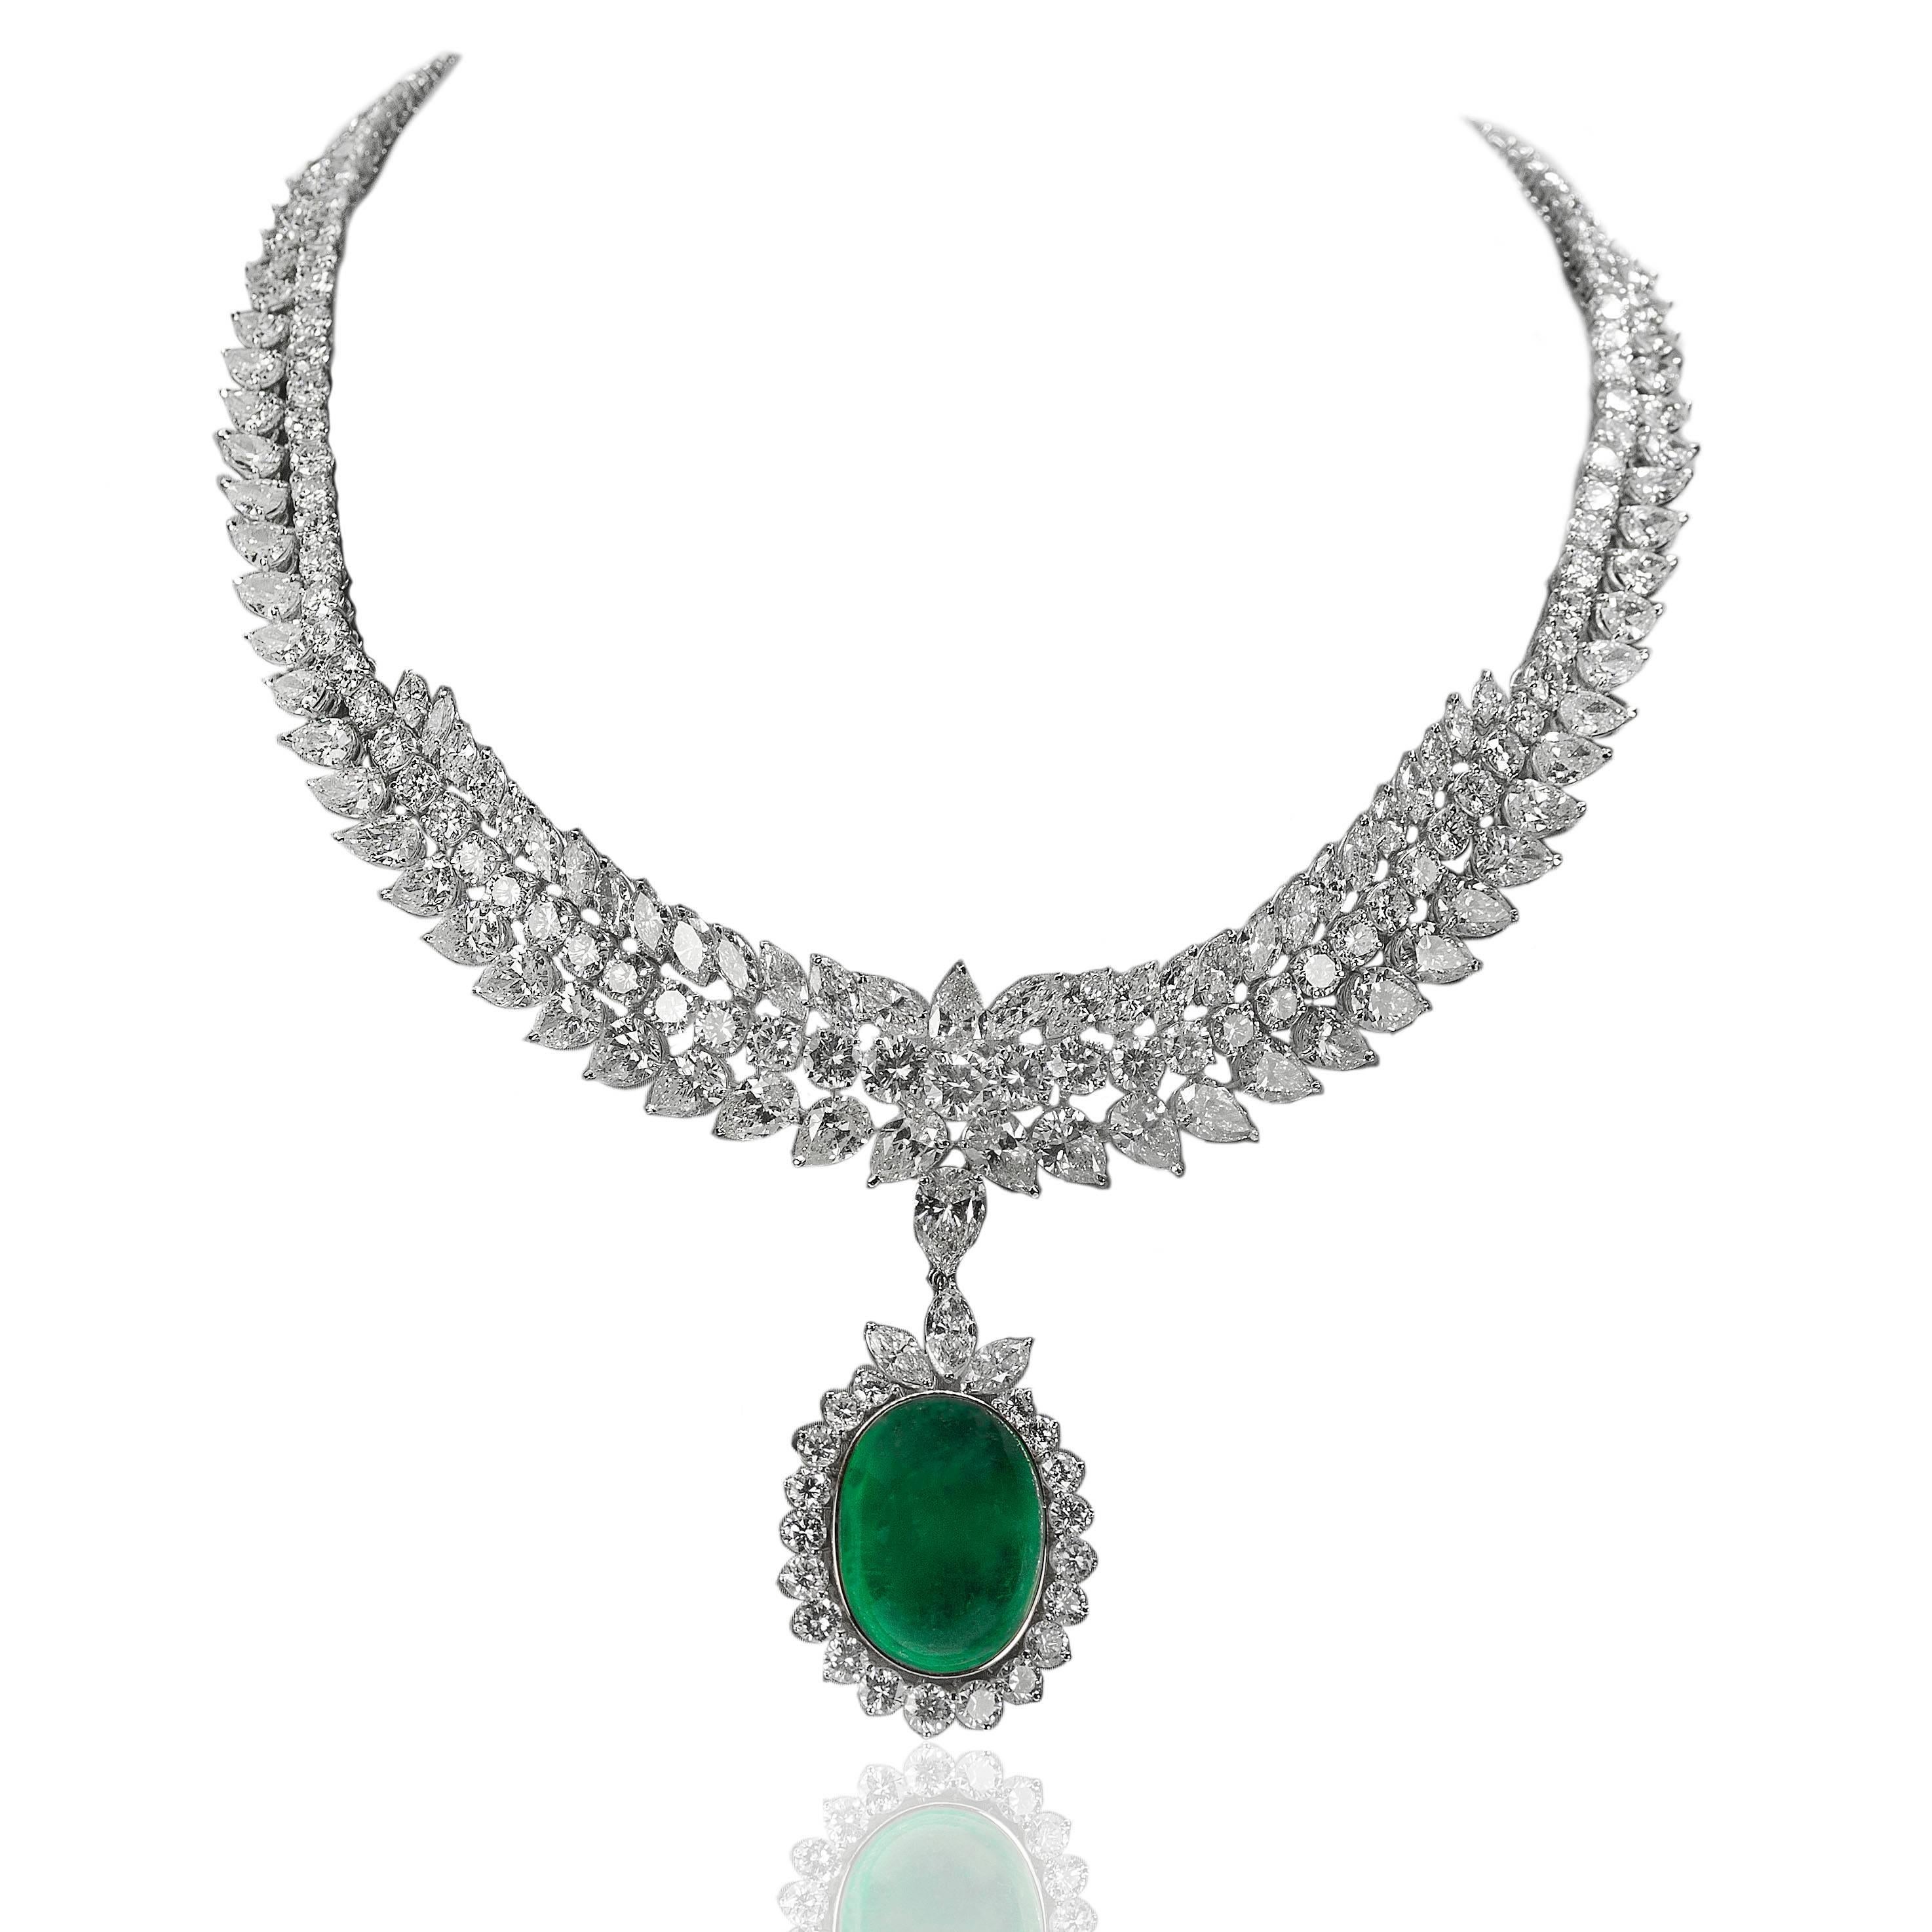 Platinum & 18k Pendant with AGL certified 34.46 carat Colombian Emerald and 5.56 carats of colorless round brilliant and pear shape diamonds. 17.71g